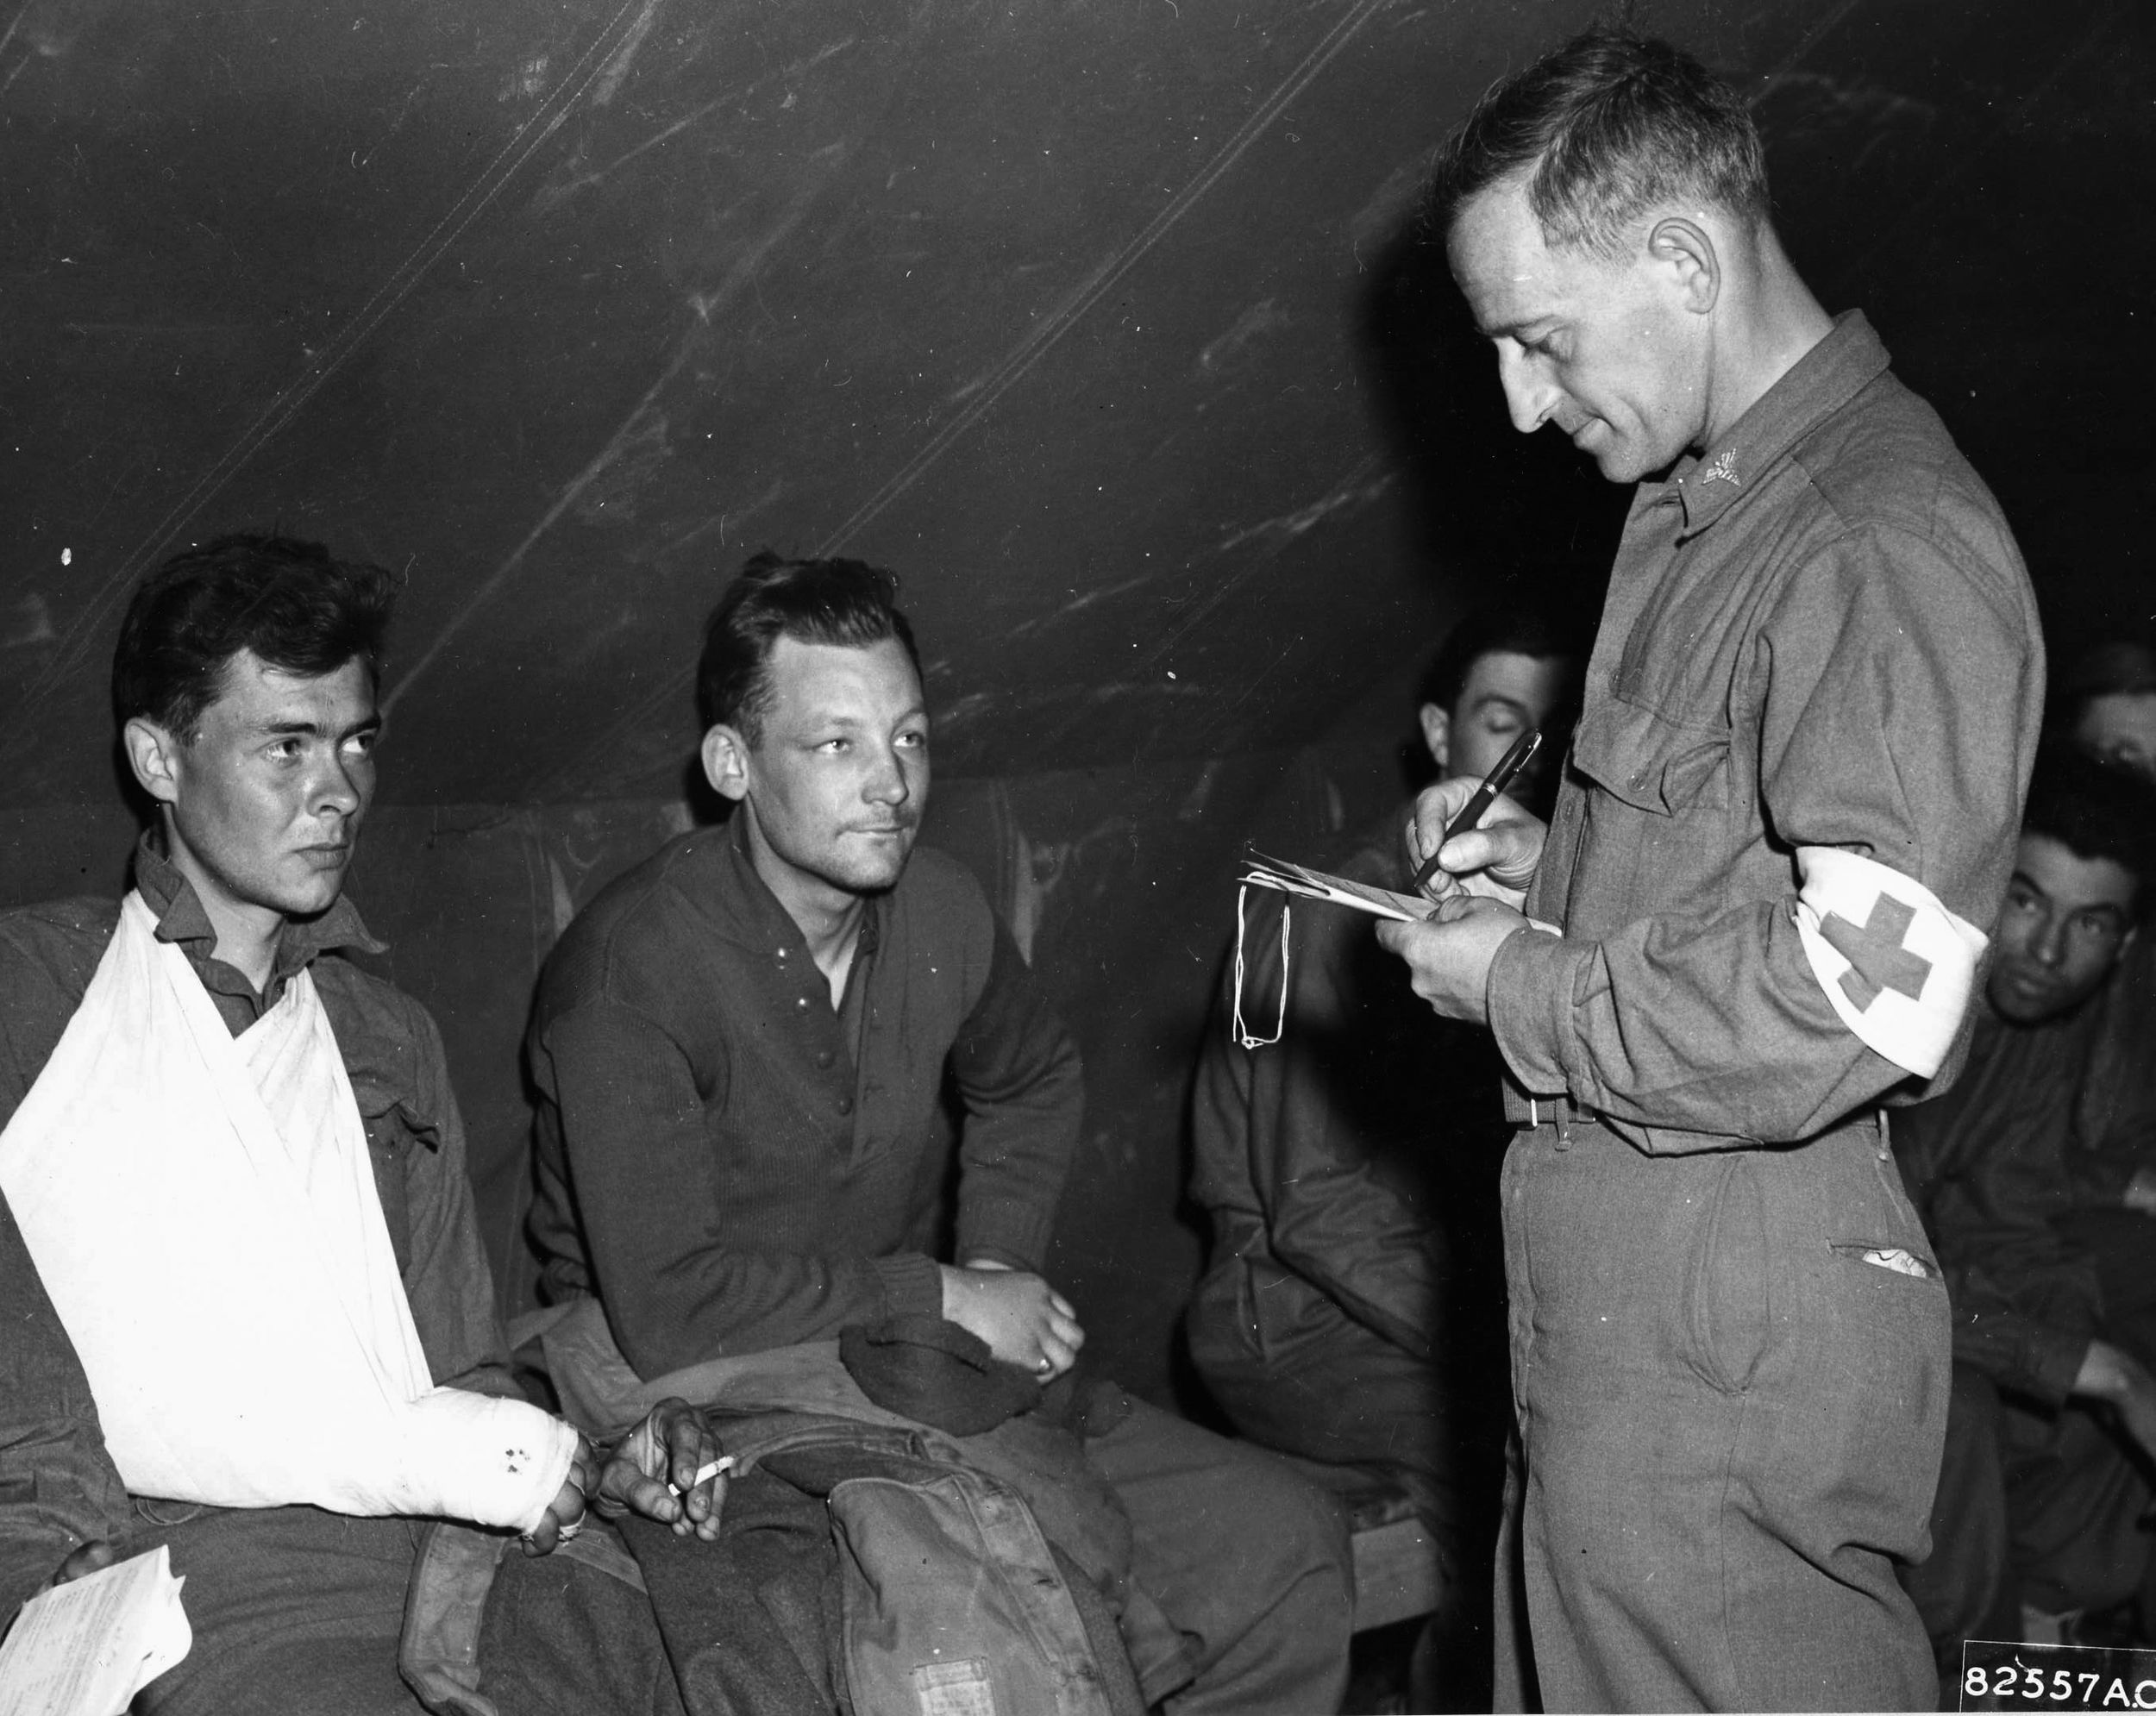 On April 27, 1945, liberated prisoners of war have their identification checked by members of the U.S. Army Medical Corps. The former POWs were then evacuated by aircraft of the 9th Troop Carrier Command.